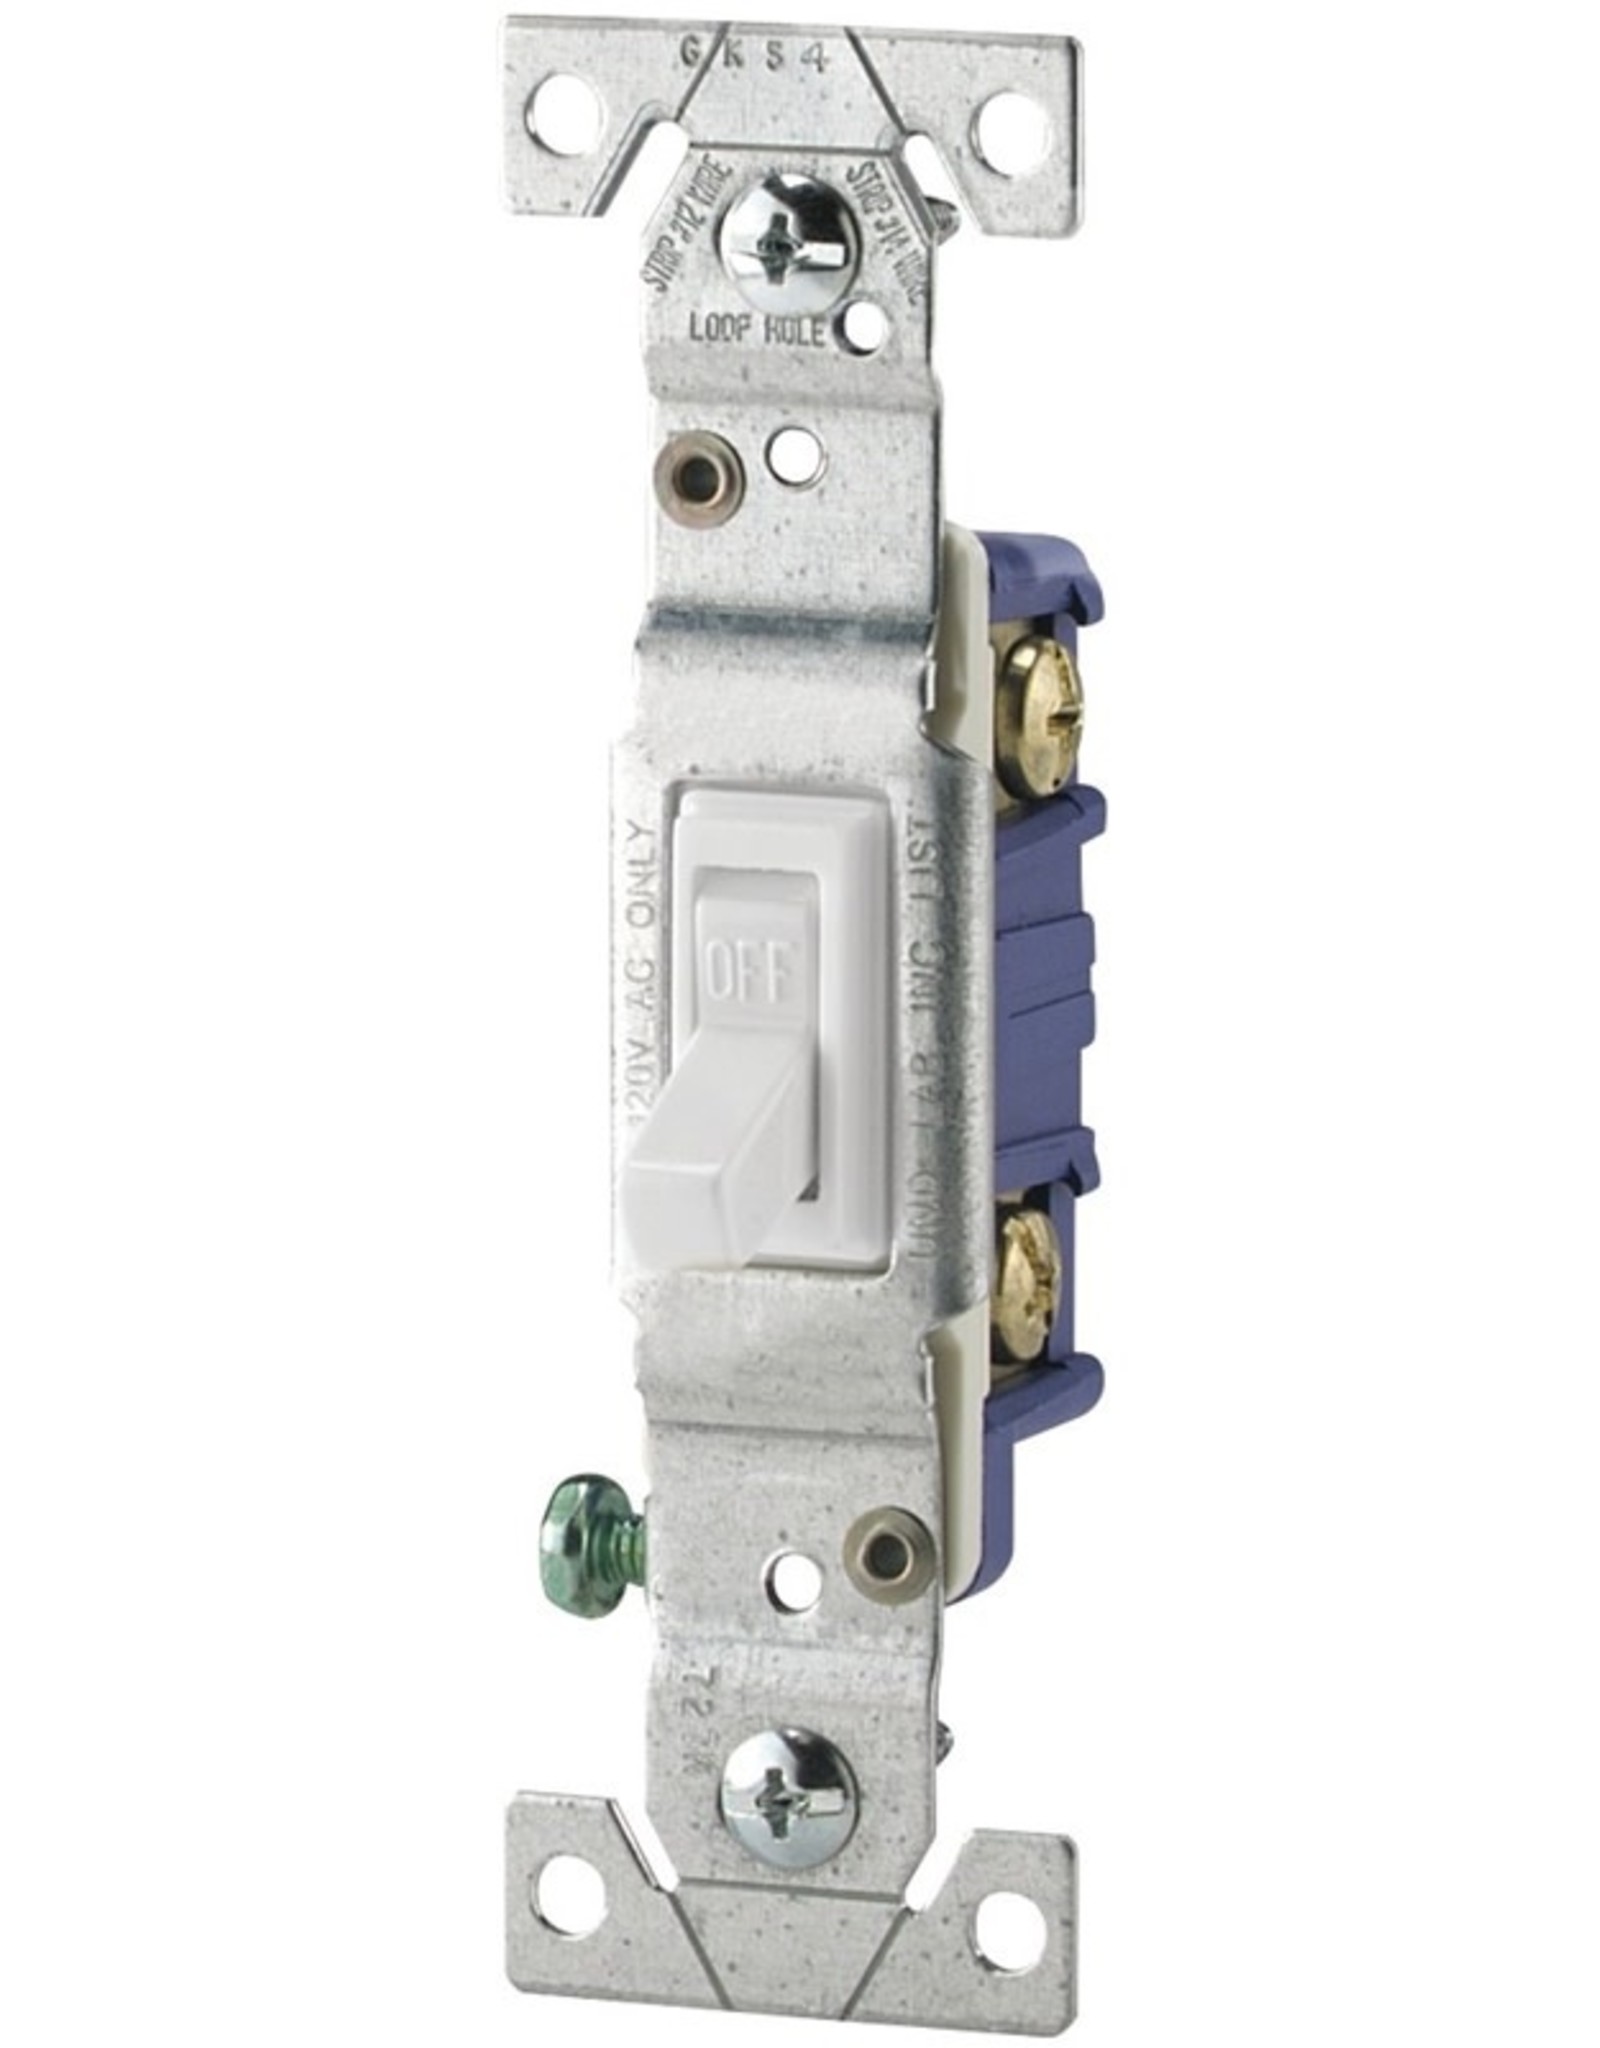 Eaton Eaton Wiring Devices 1301-7W Toggle Switch, 15 A, 120 V, Polycarbonate Housing Material, White*